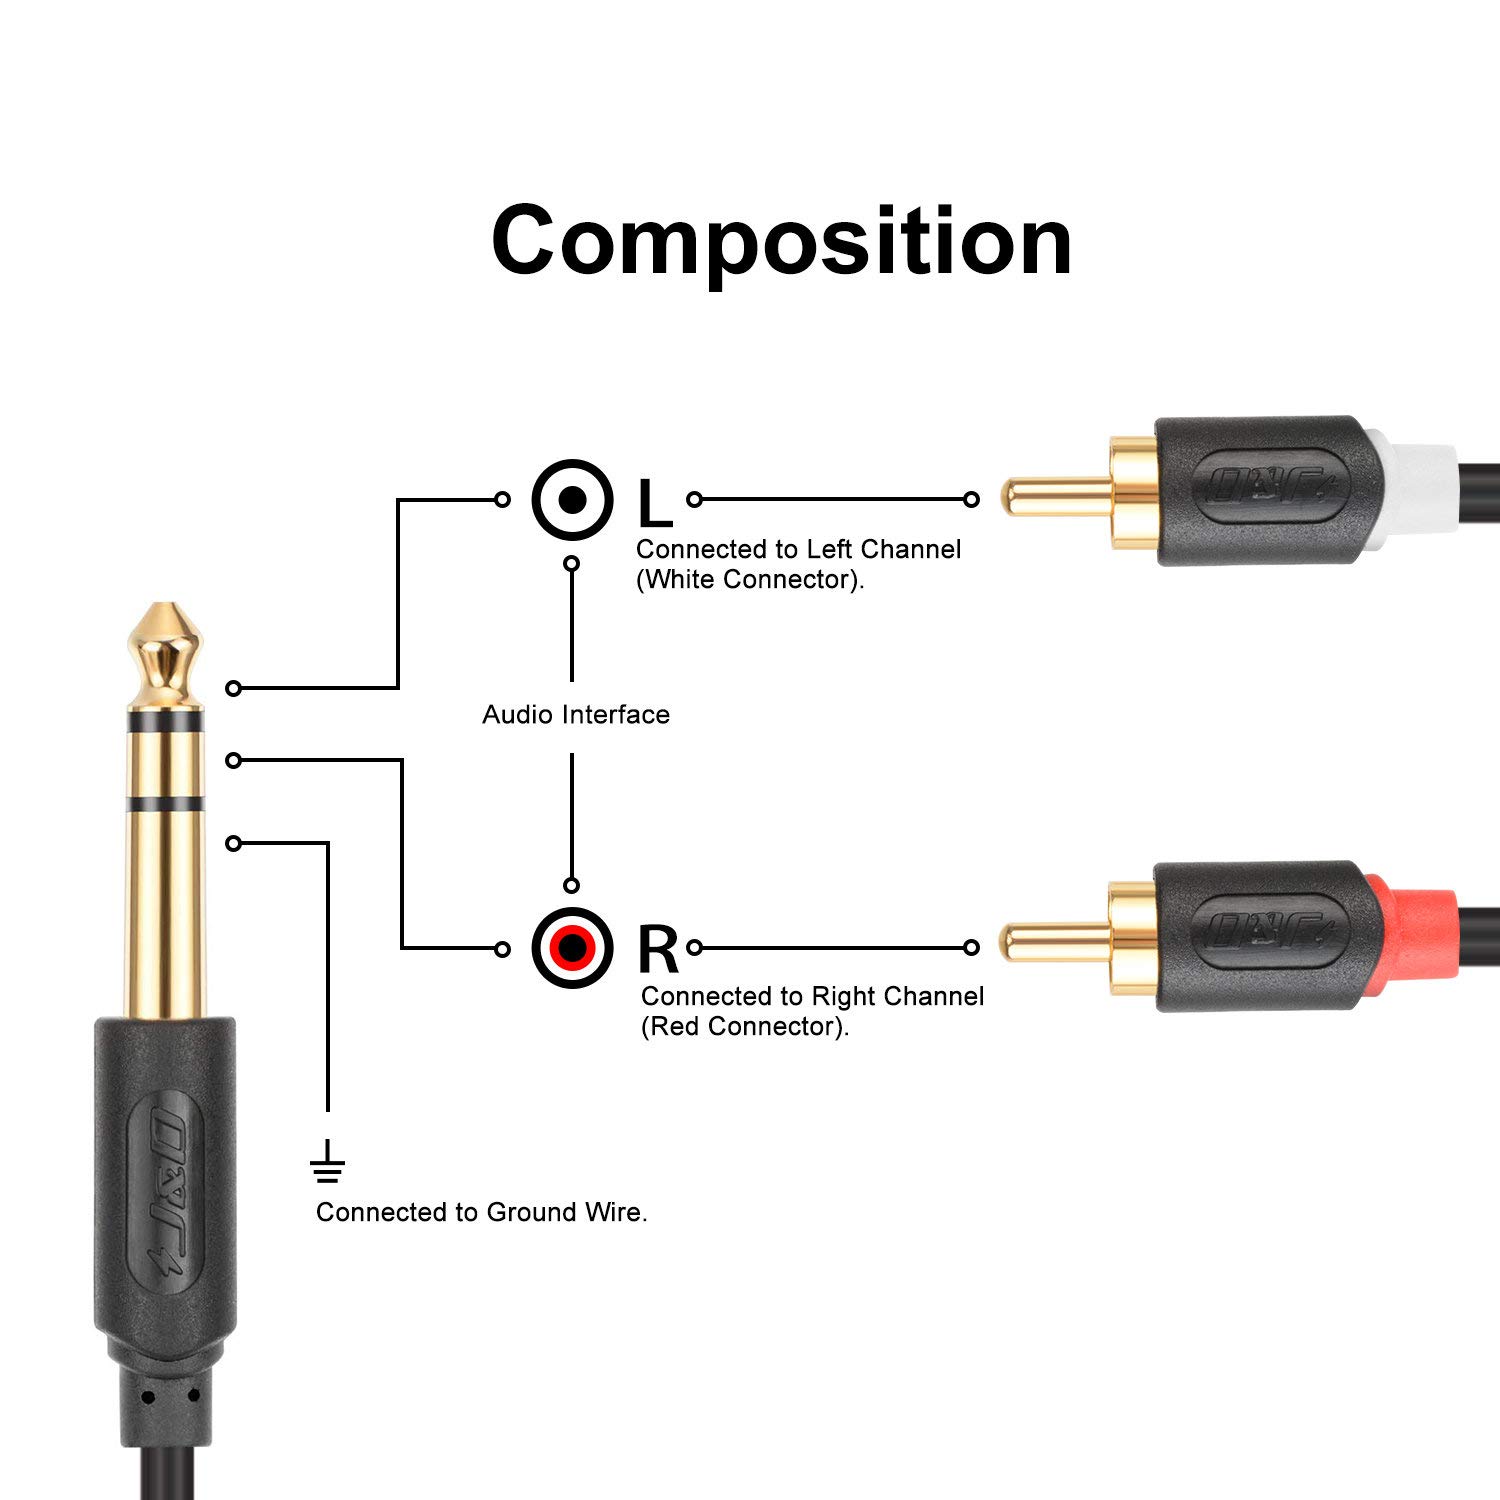 J&D Gold Plated 6.35mm 1/4 inch Male to 2 RCA Male Stereo Audio Adapter 1/4 to RCA Cable, 9 ft - image 4 of 8